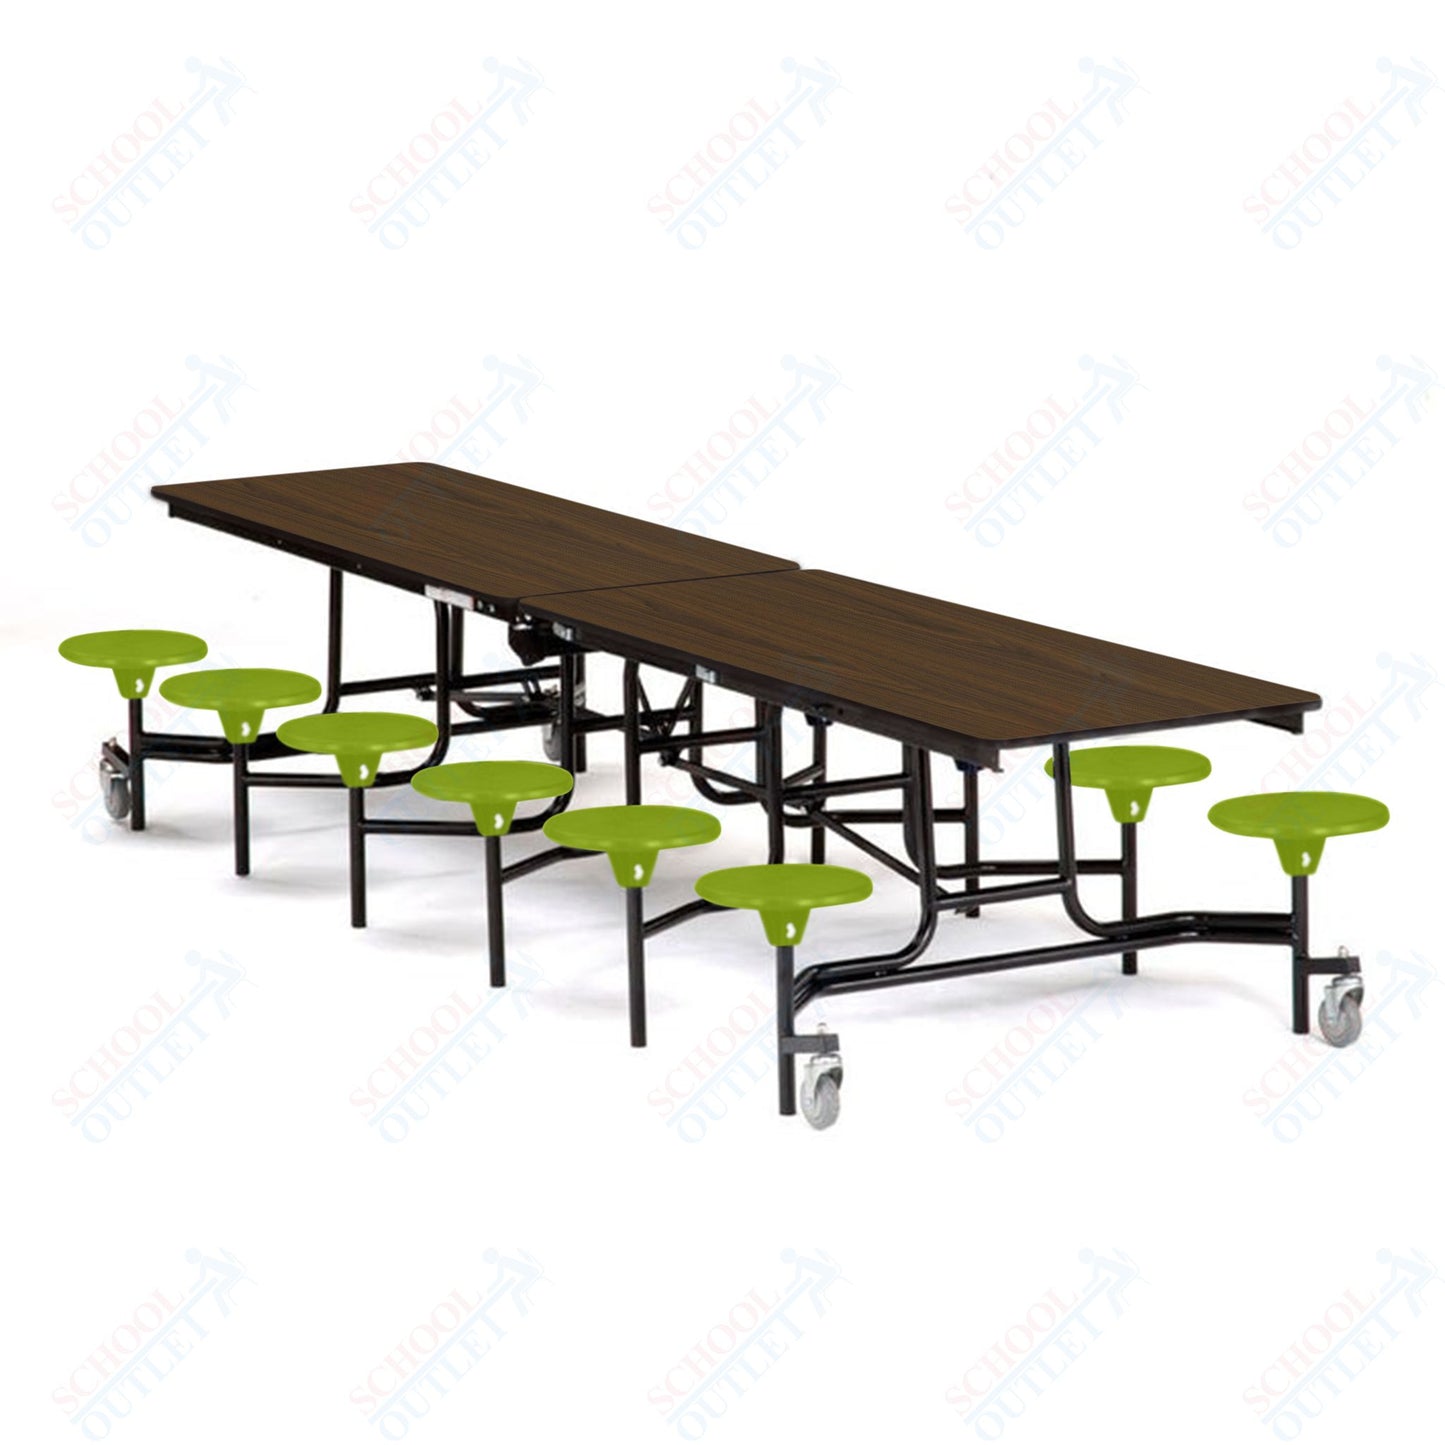 Mobile Cafeteria Lunchroom Stool Table - 30" W x 12' L - 12 Stools - Particleboard Core - T-Molding Edge - Black Powdercoated Frame